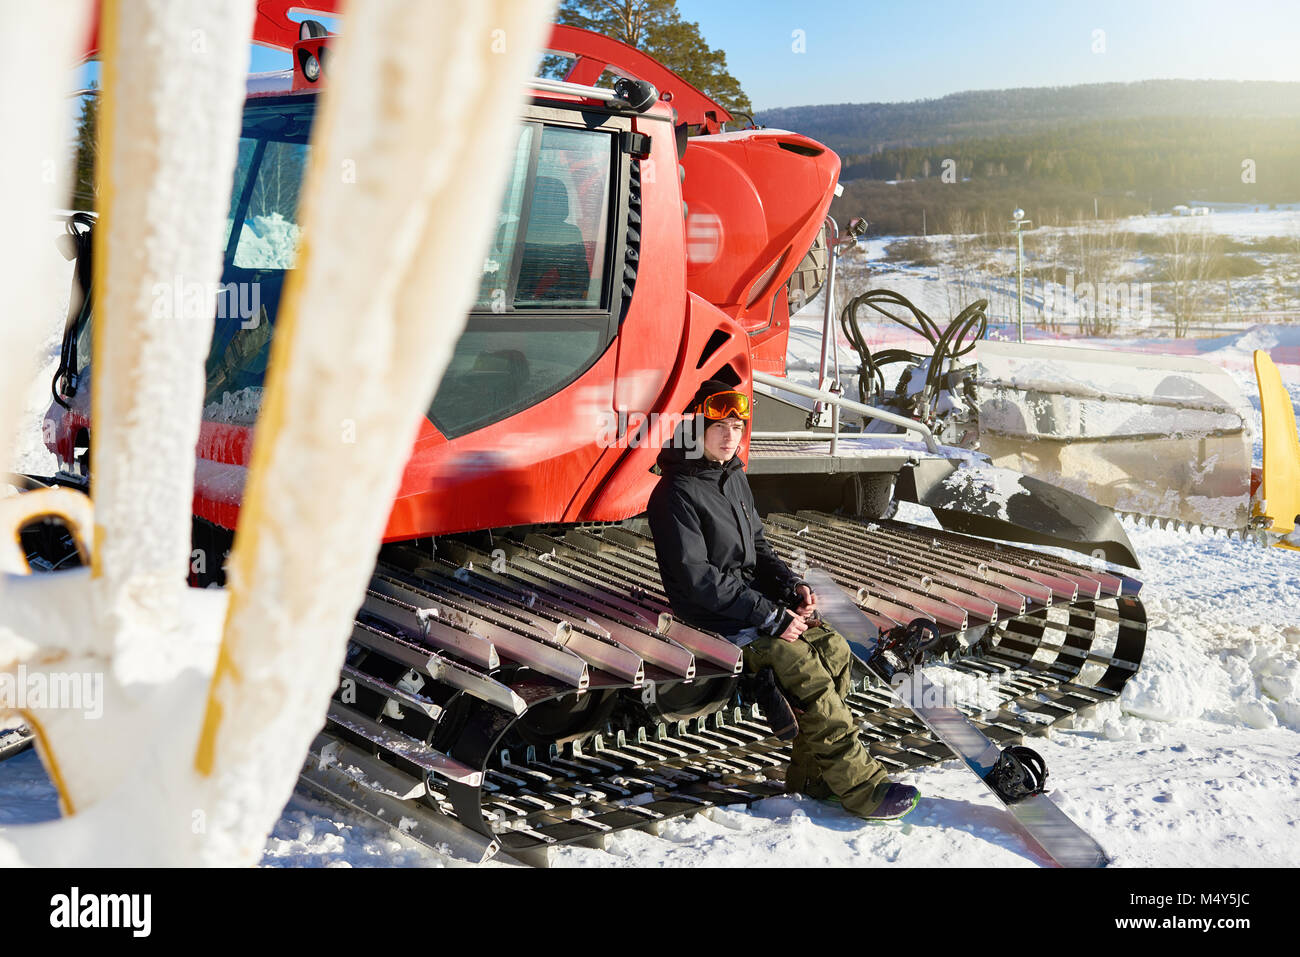 Full length portrait of modern young snowboarder sitting on caterpillar drives of snowcat at snow covered piste of ski resort, copy space Stock Photo